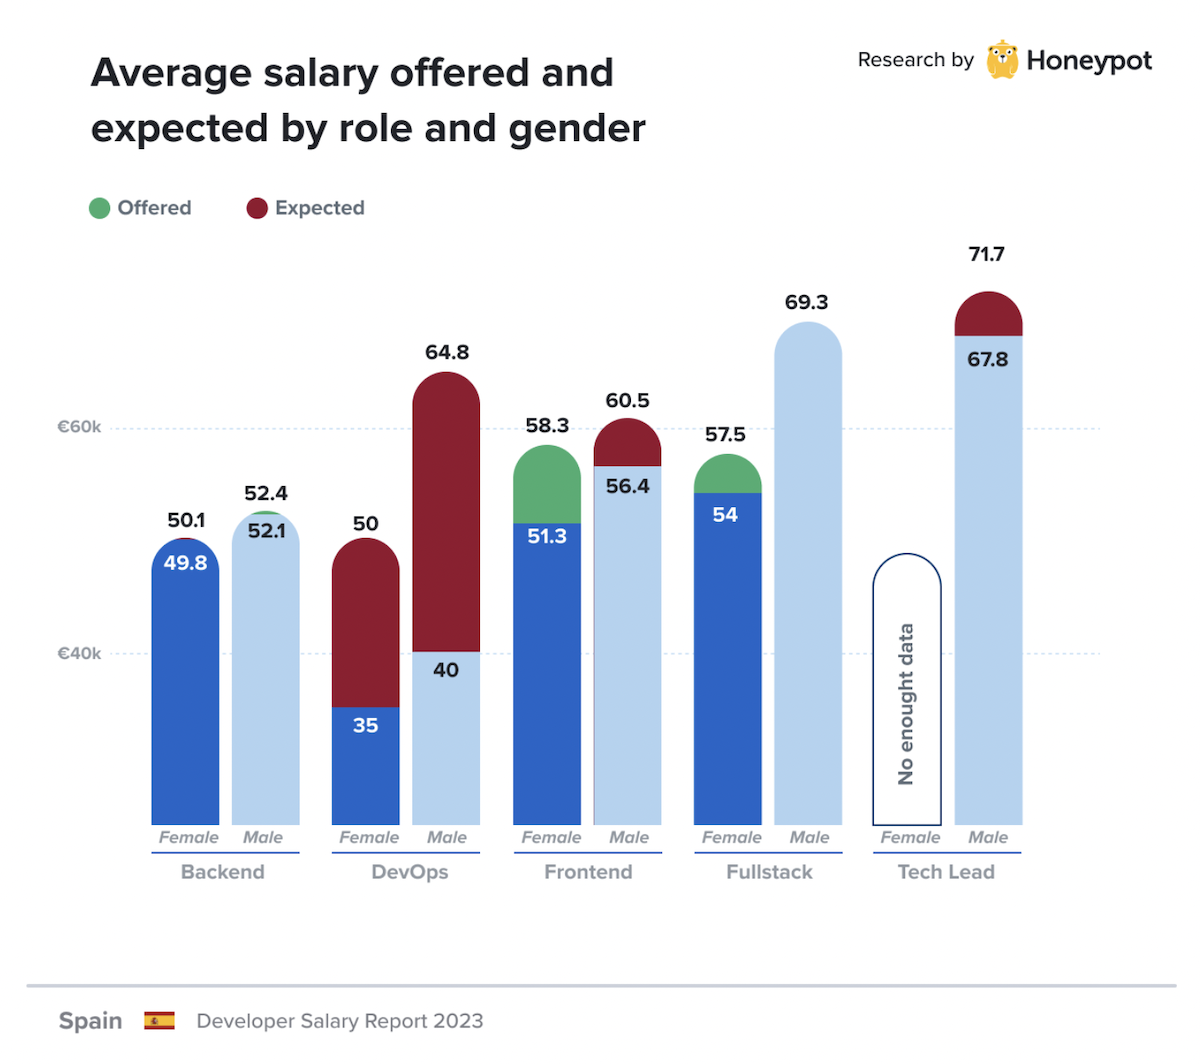 Spain – Average offered and expected salary by role and gender